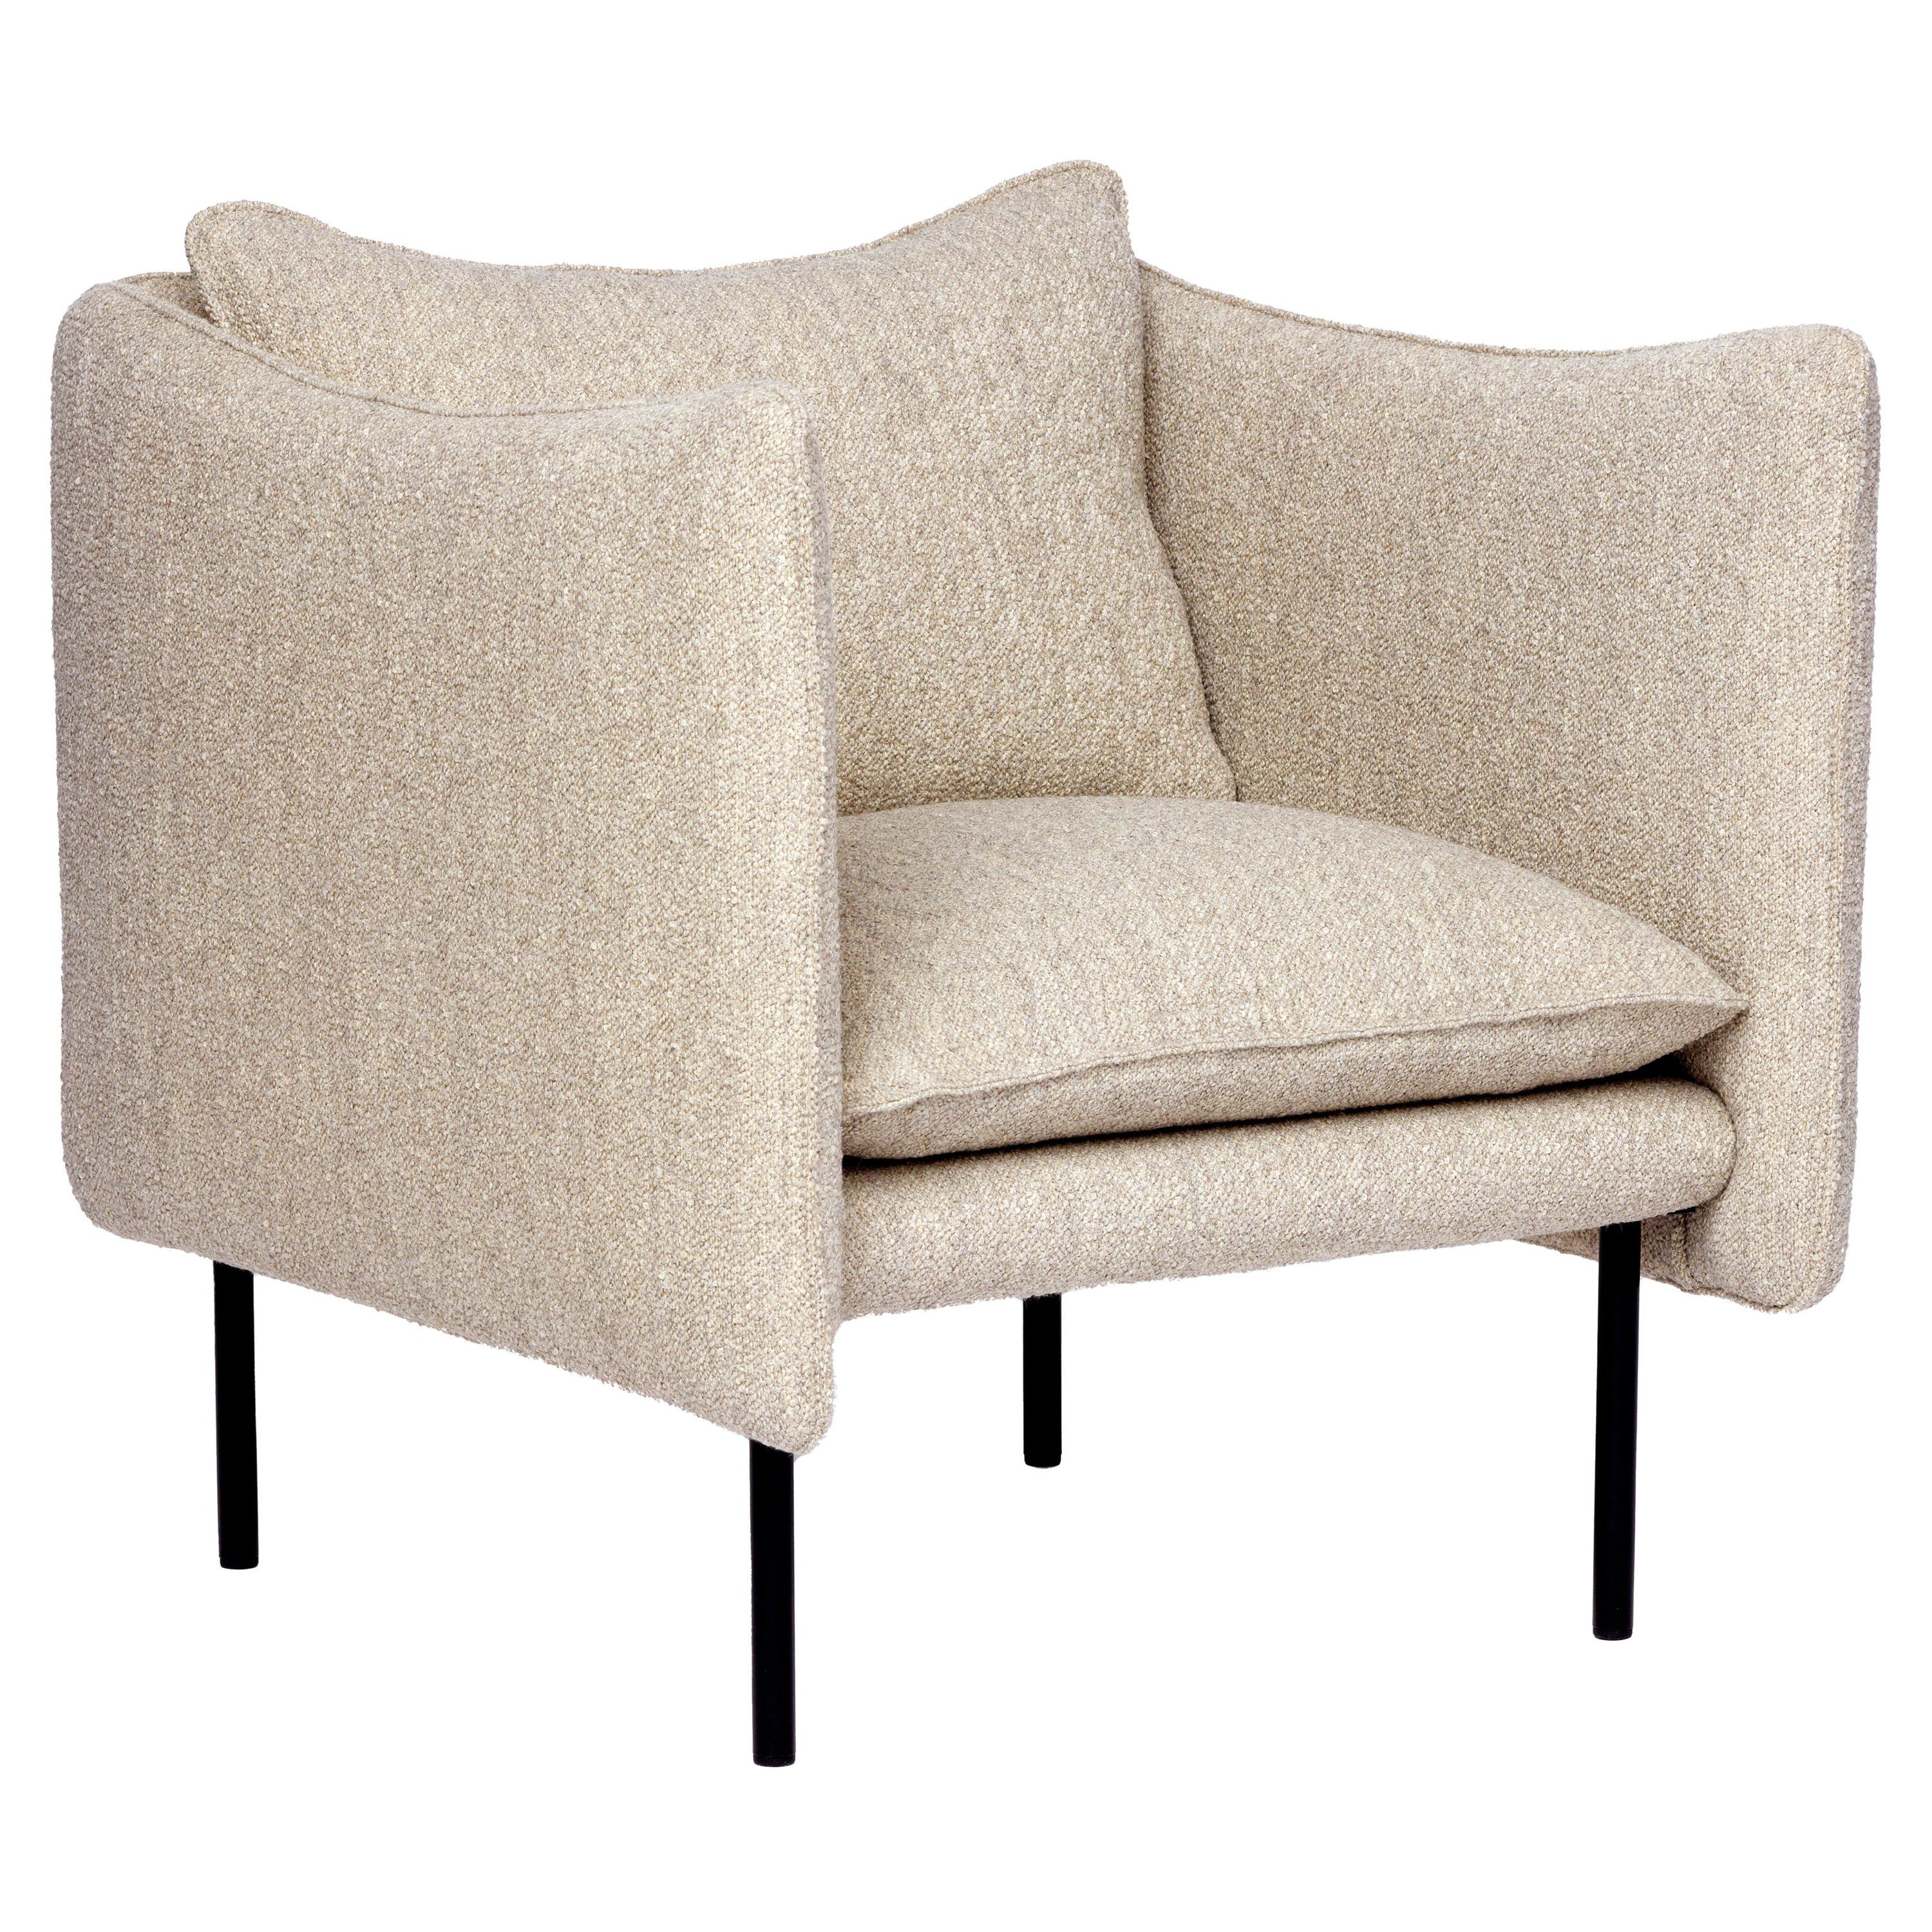 Fauteuil Contemporary 'Tiki' by Fogia, tissu sable 